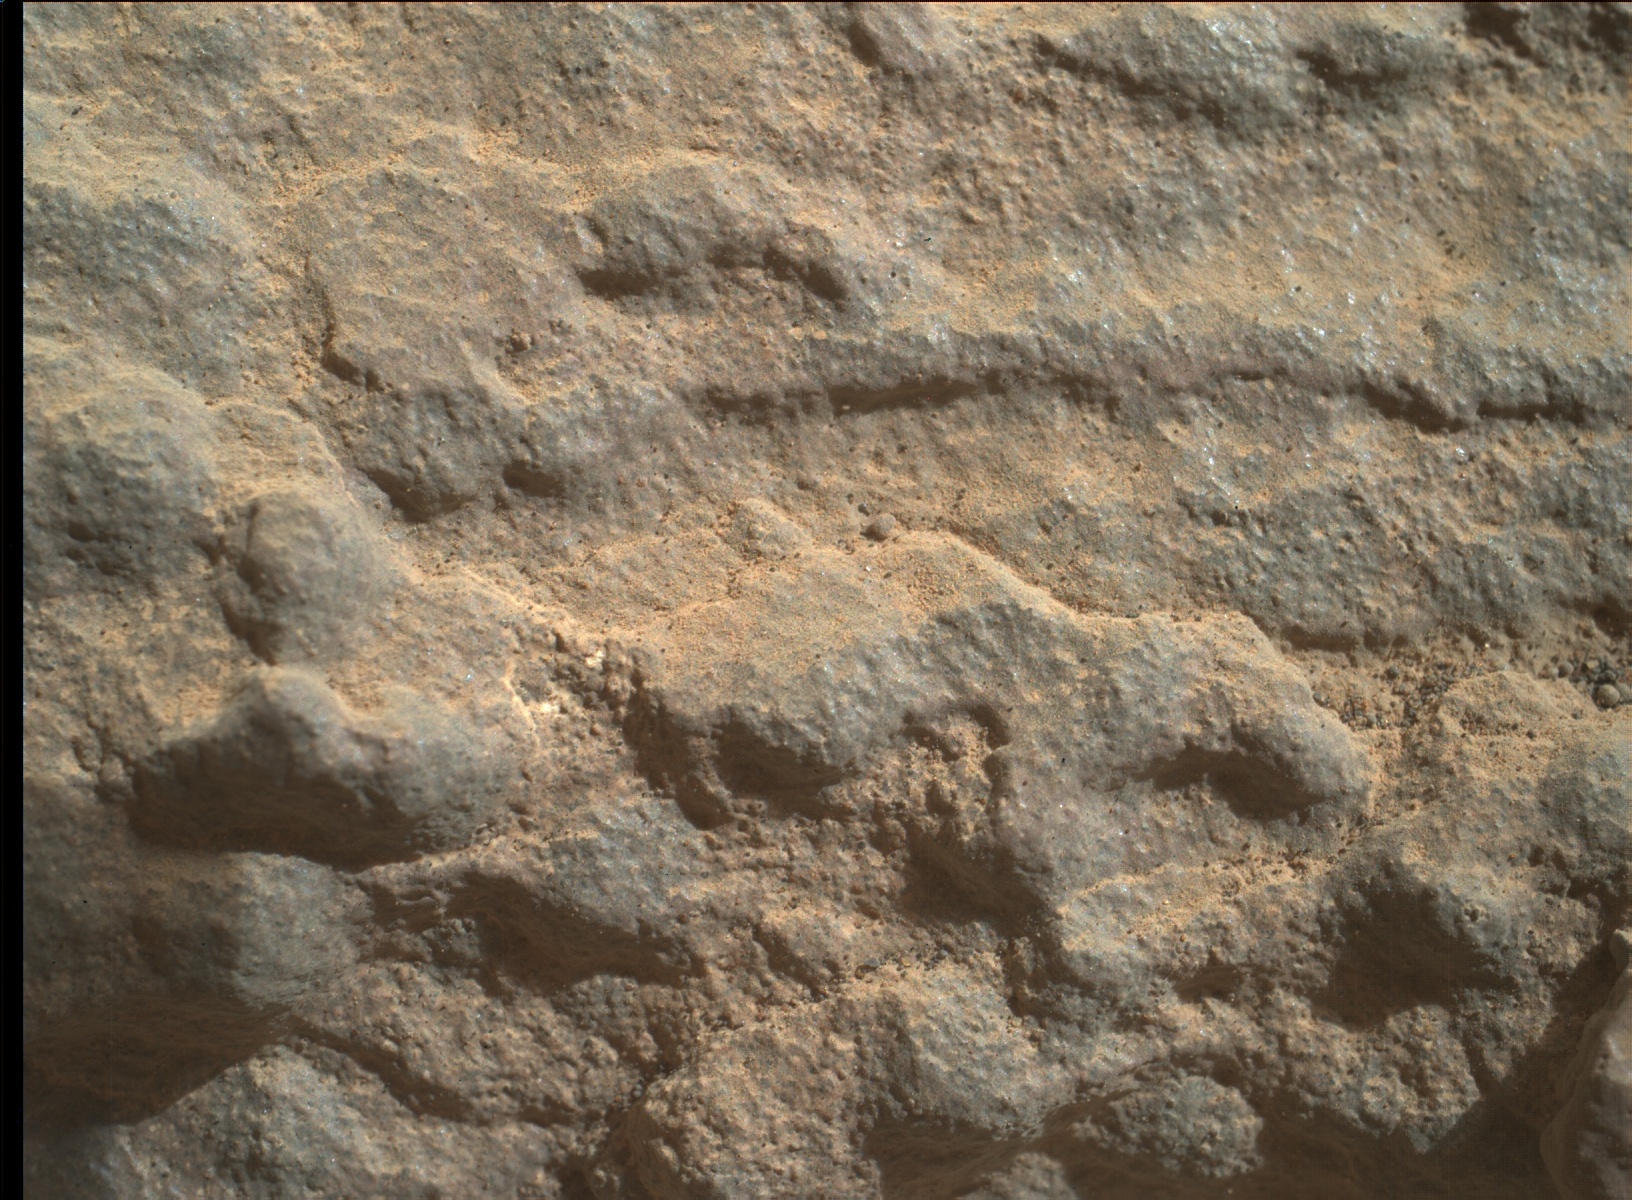 Nasa's Mars rover Curiosity acquired this image using its Mars Hand Lens Imager (MAHLI) on Sol 1714